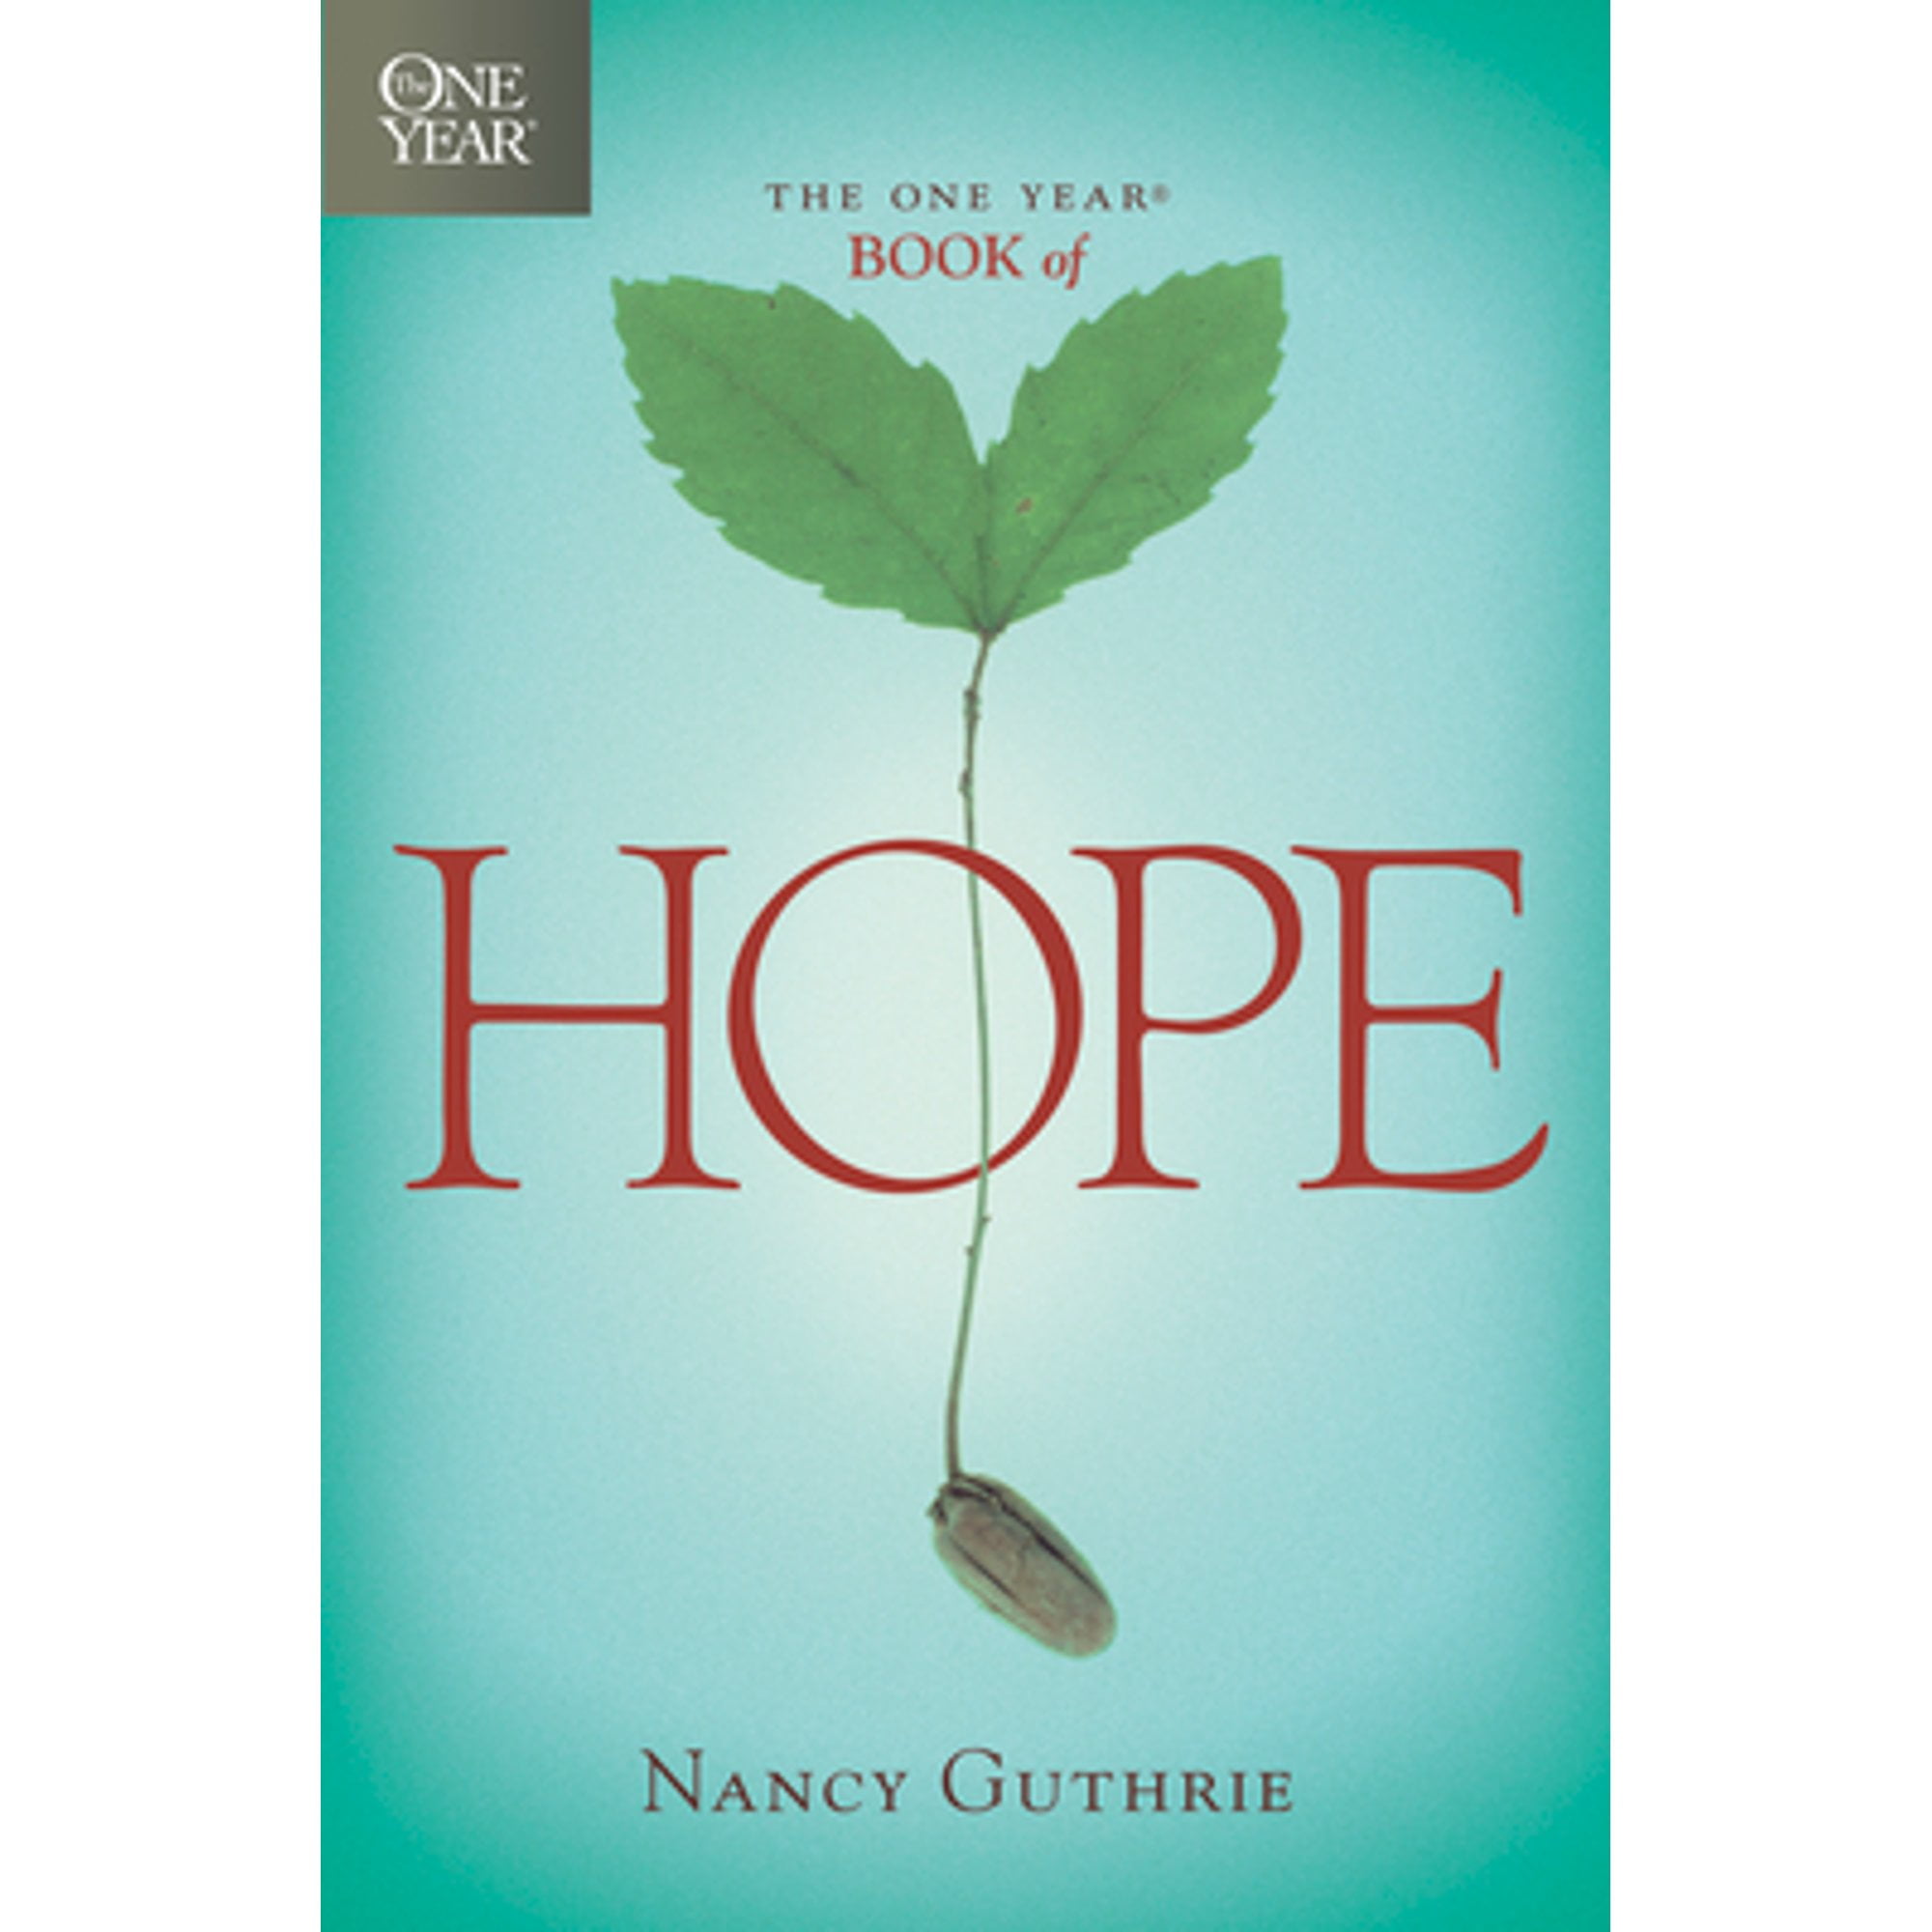 Pre-Owned The One Year Book of Hope: A 365-Day Devotional with Daily Scripture Readings and Uplifting Reflections that Encourage, Comfort, Restore Joy Books Paperback Nancy Guthrie